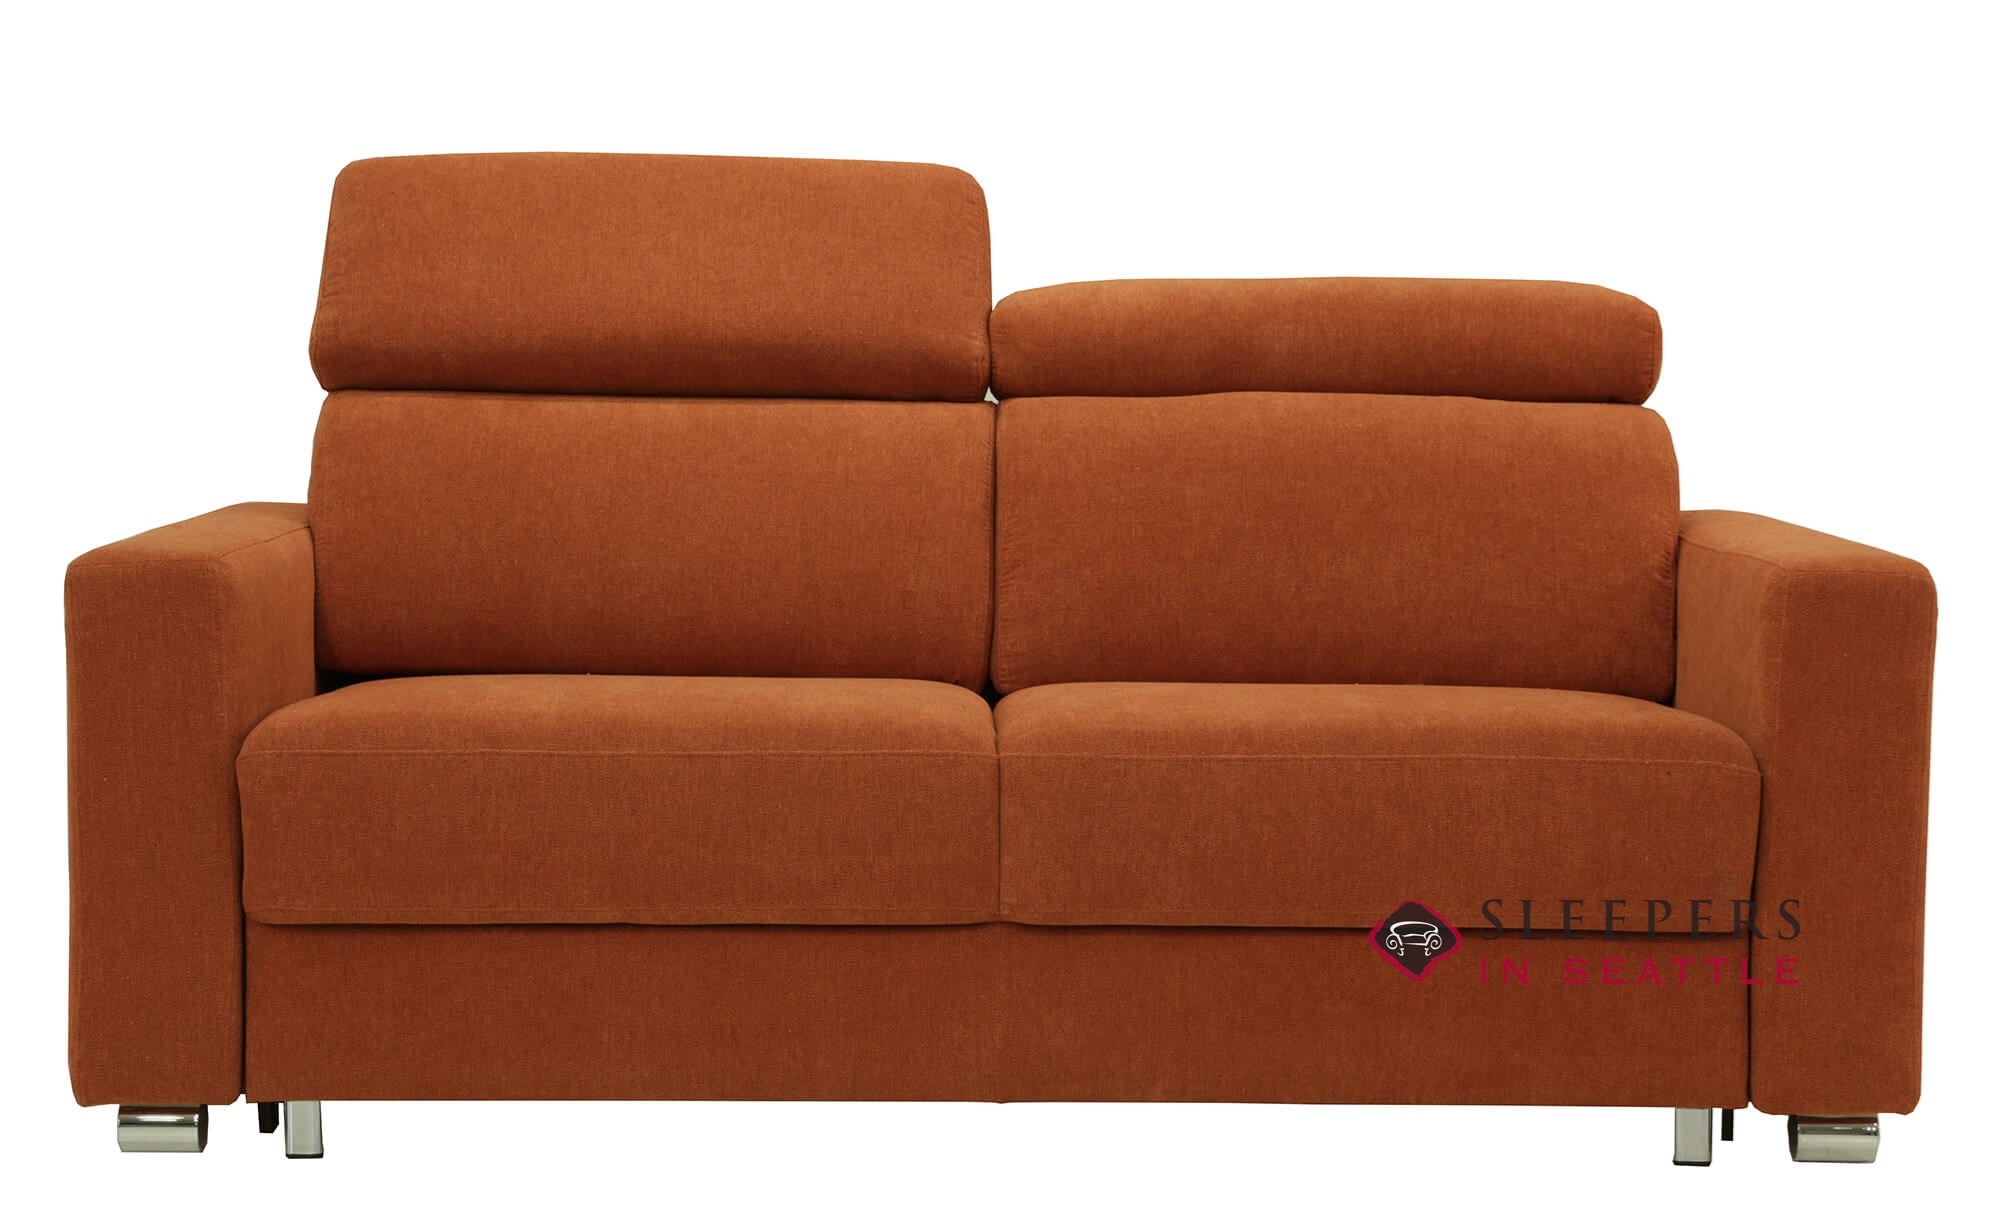 luonto sofa bed reviews